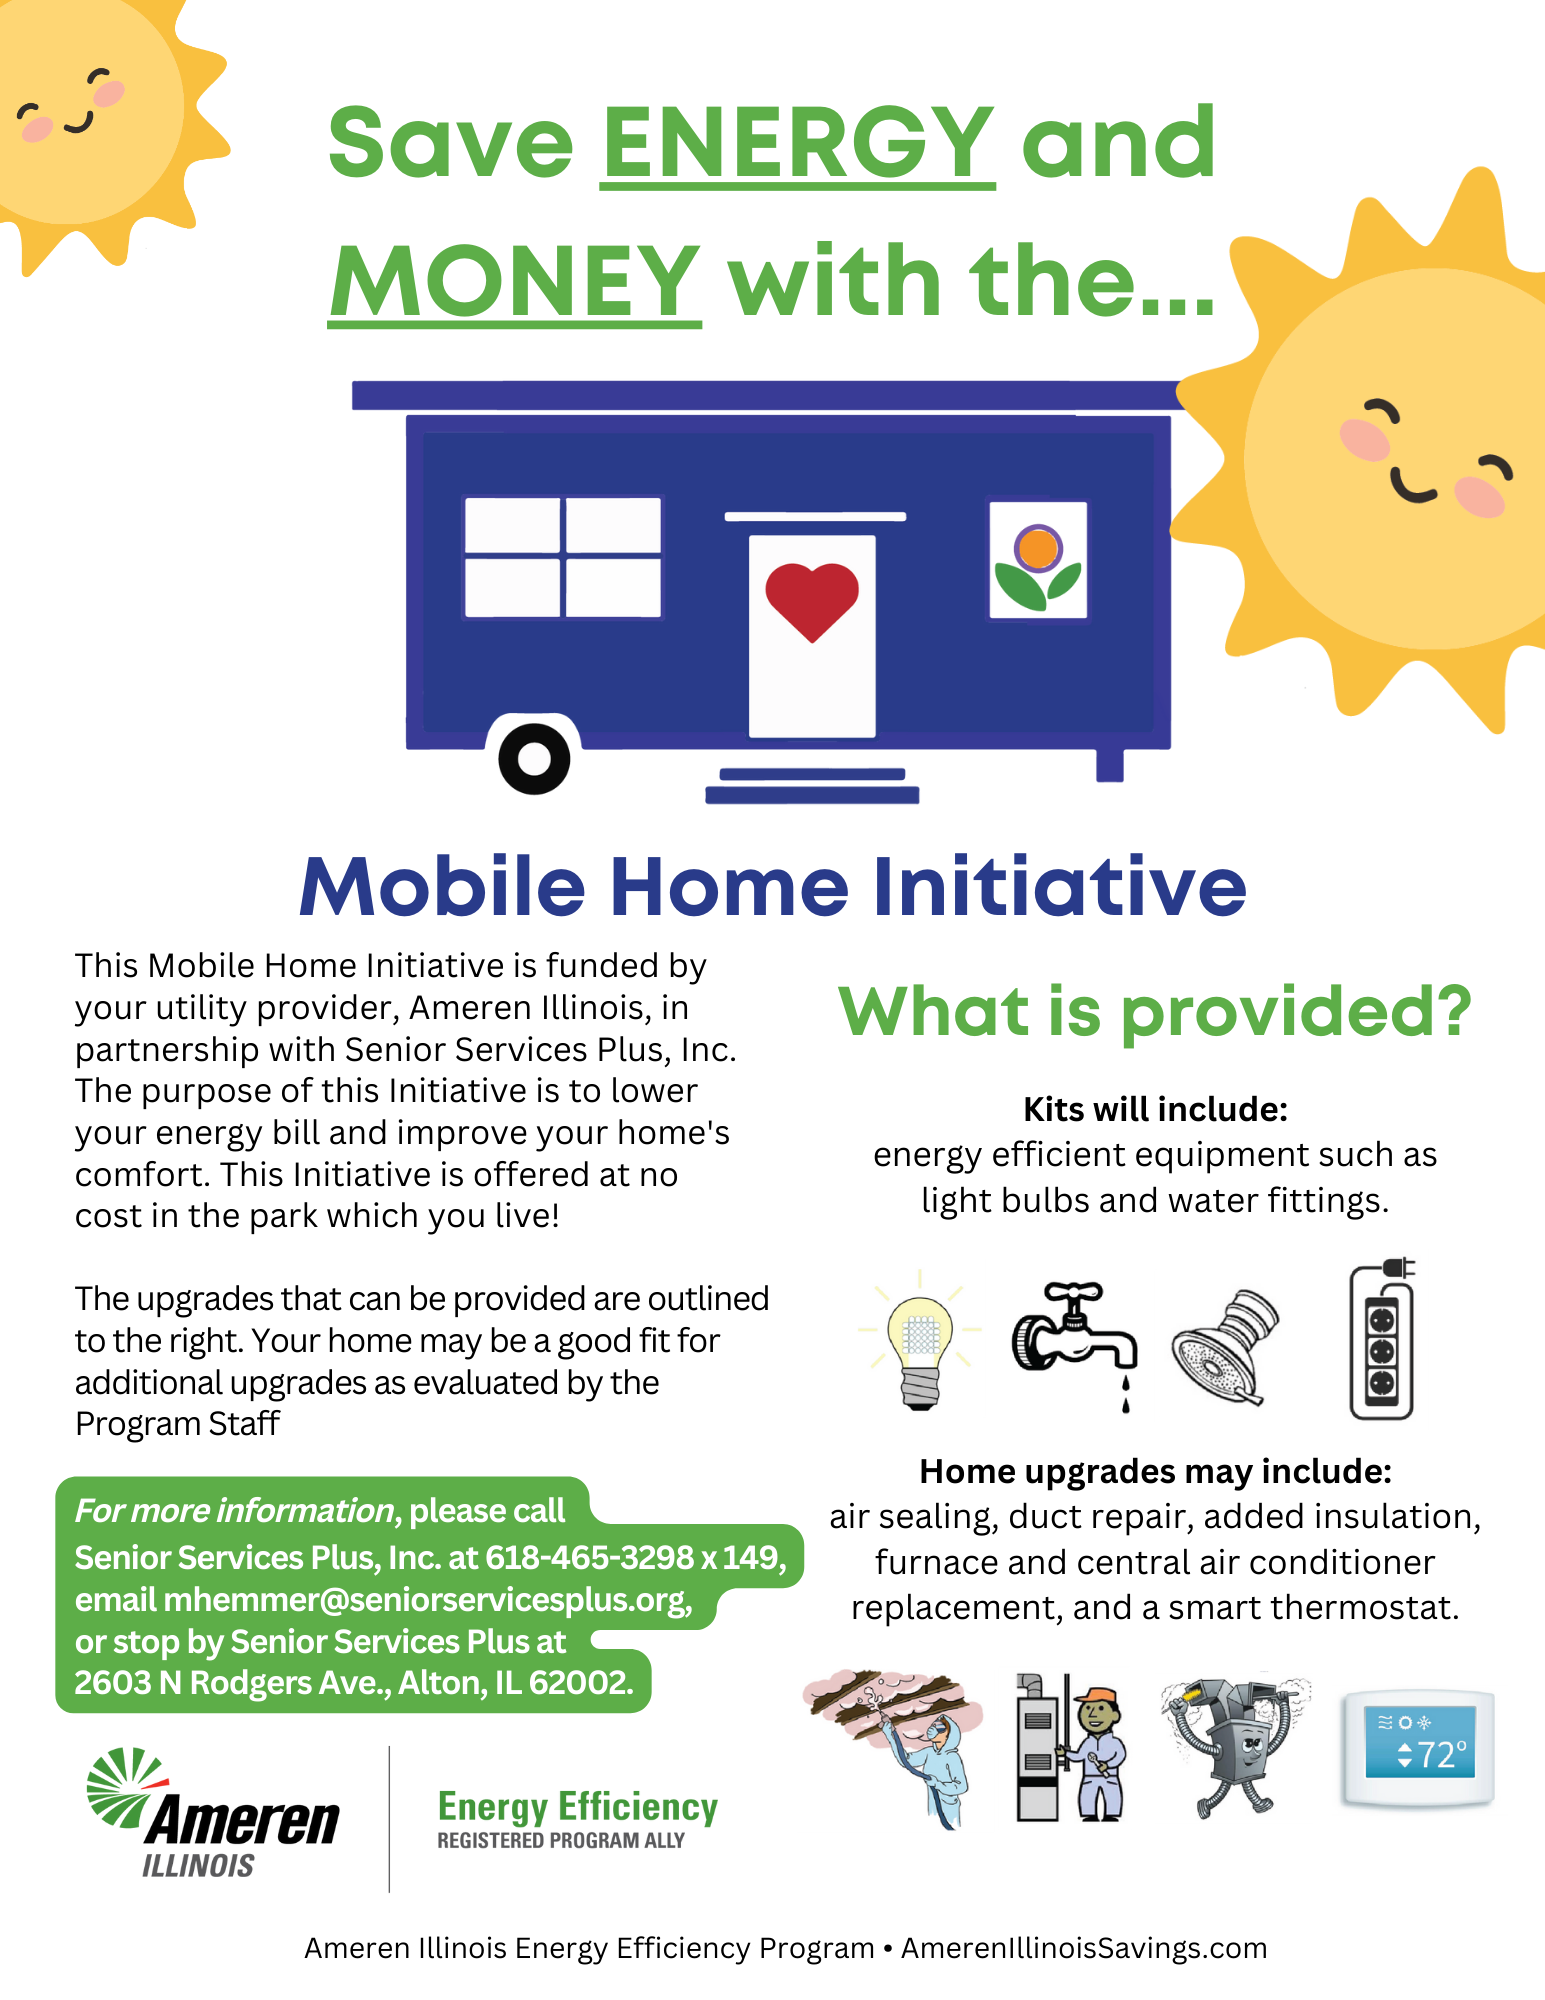 Save Energy with the Mobile Home Initiative